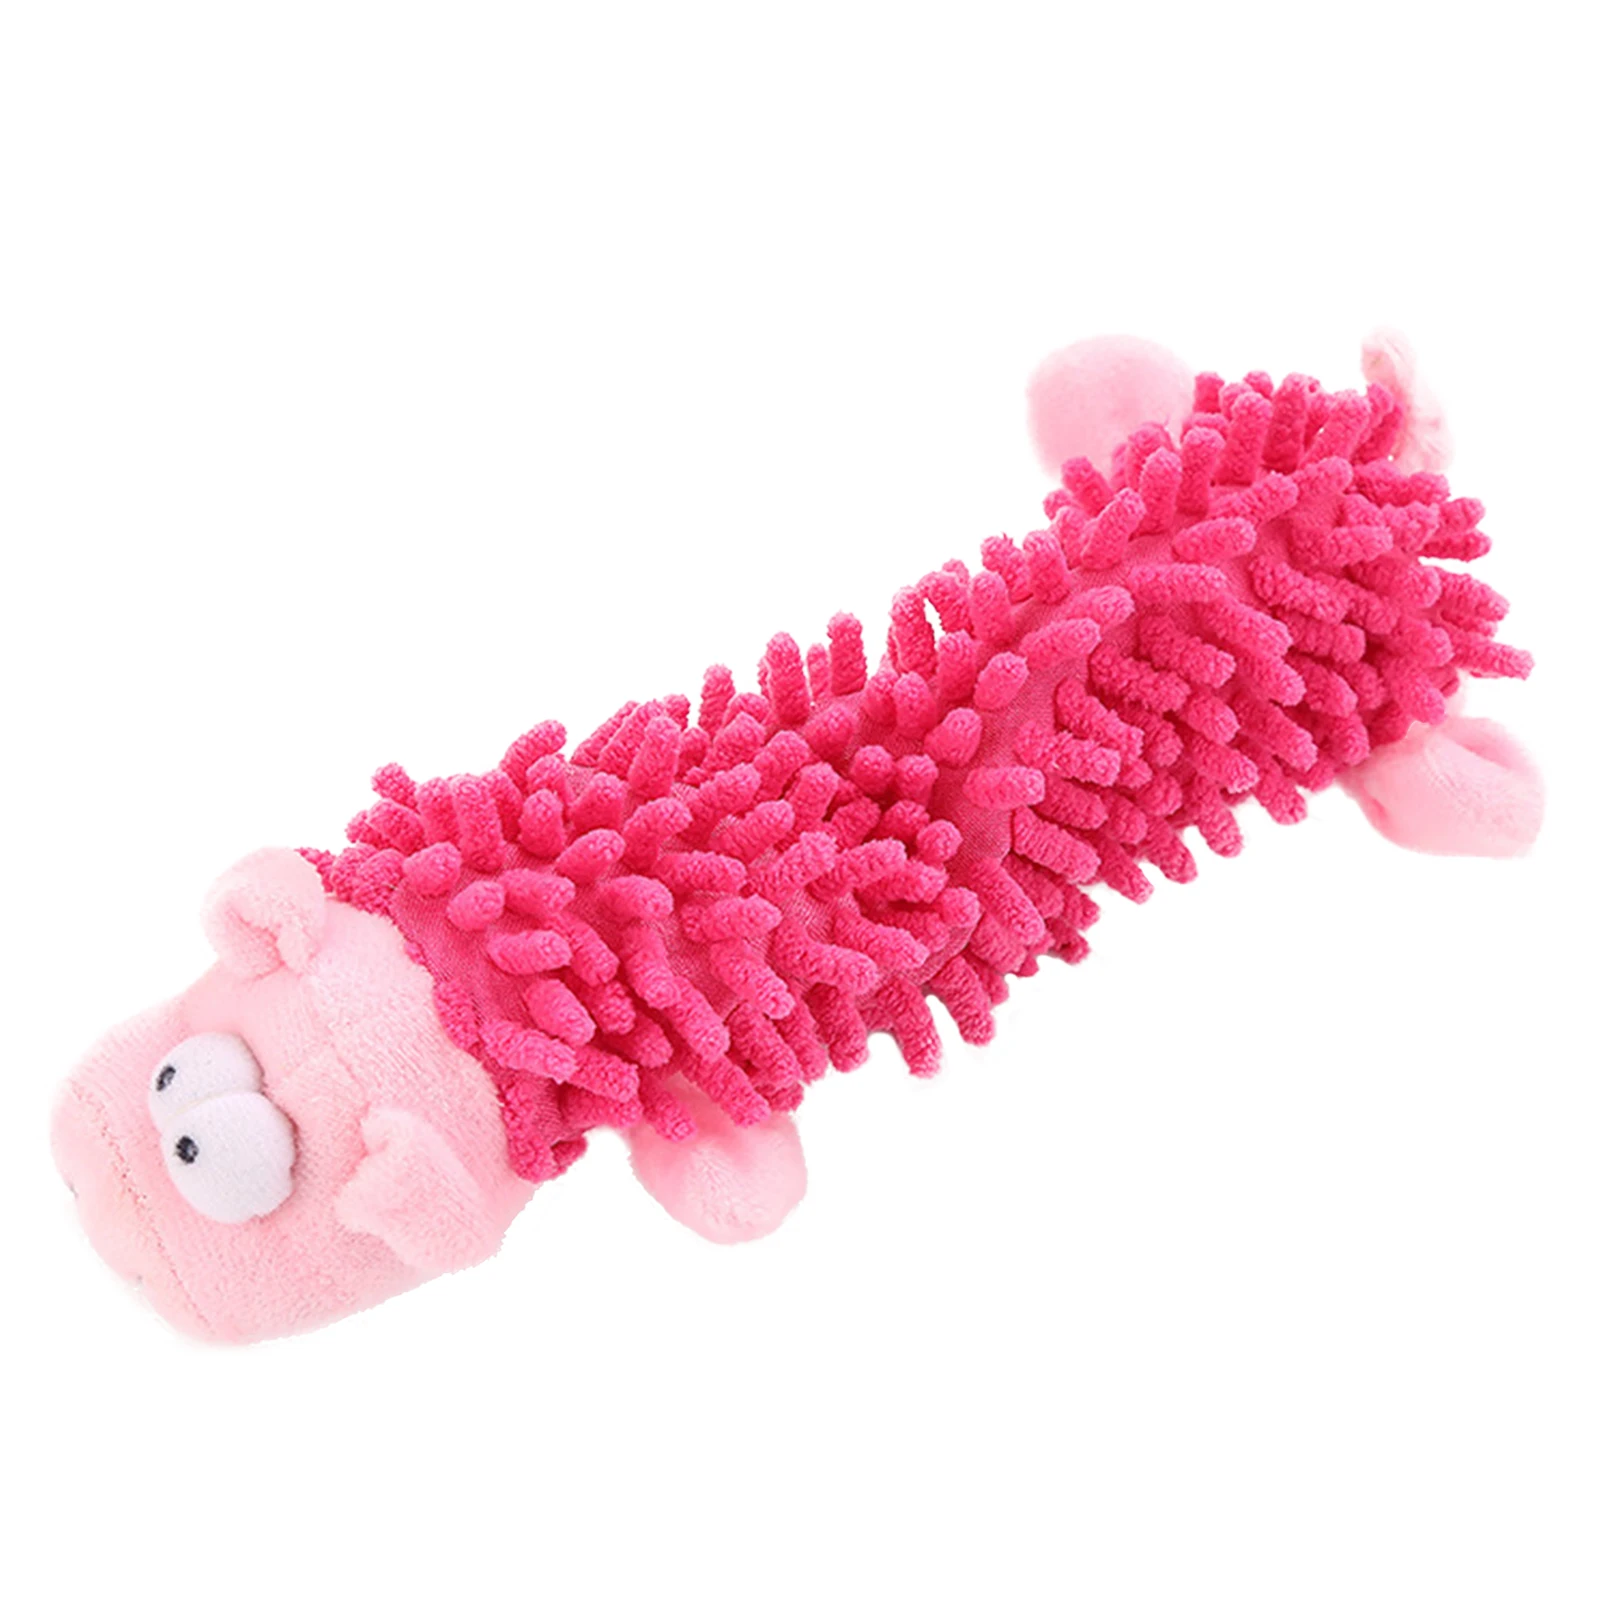 

Soft Plush Pet Supplies With Squeaker For Teething Bite Resistant Pink Pig Lightweight Entertainment Anxiety Relief Dog Chew Toy